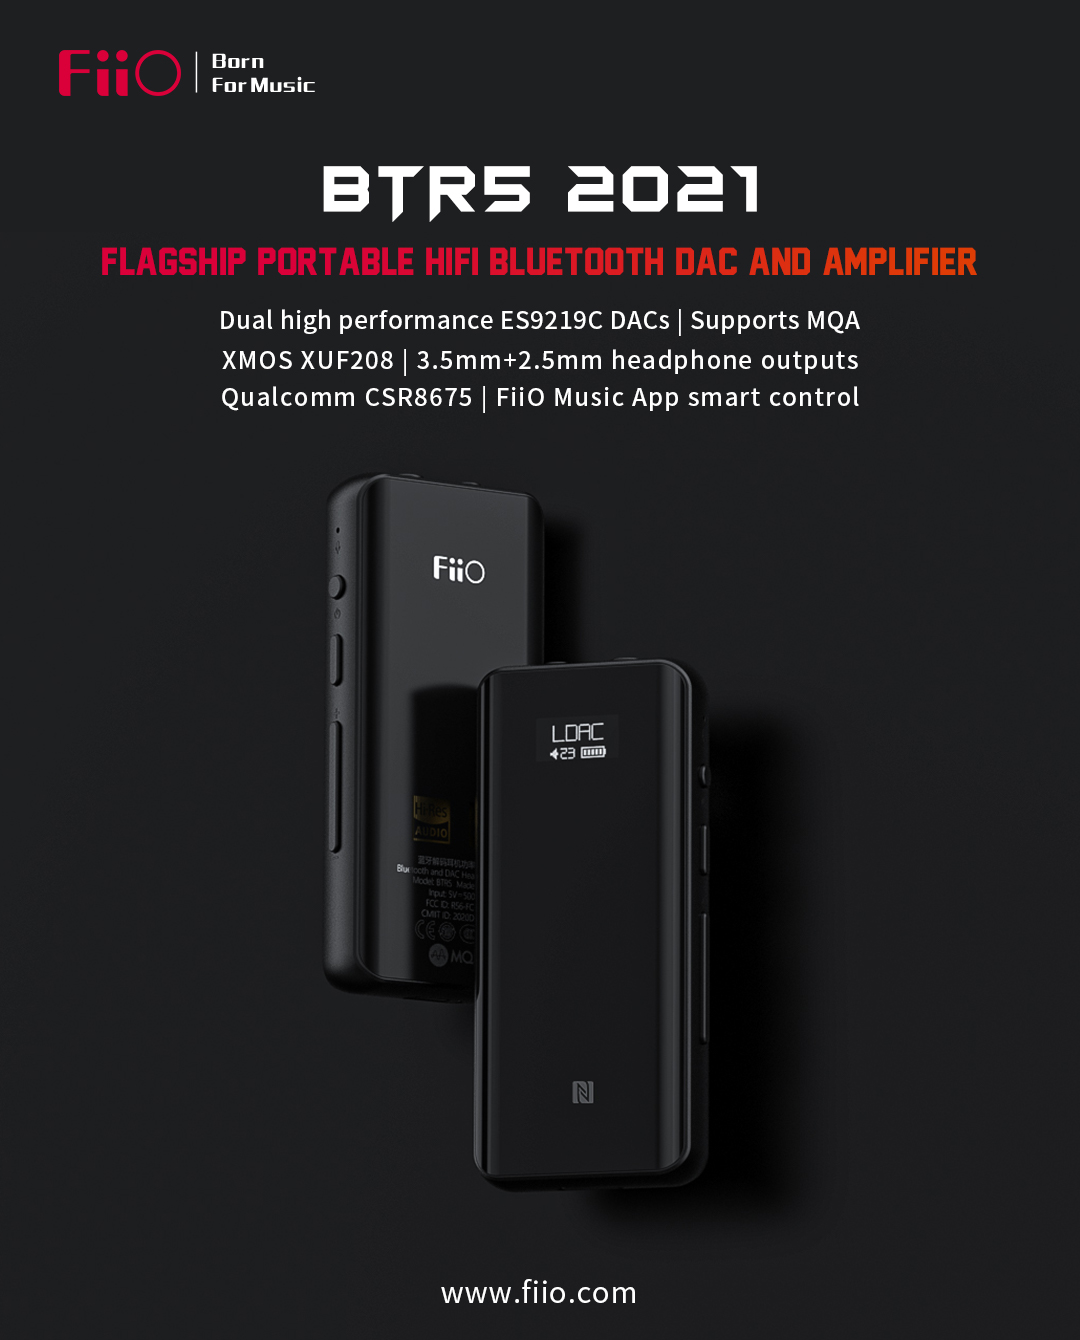 Flagship Portable HiFi Bluetooth DAC and Amplifier BTR5 2021 Is